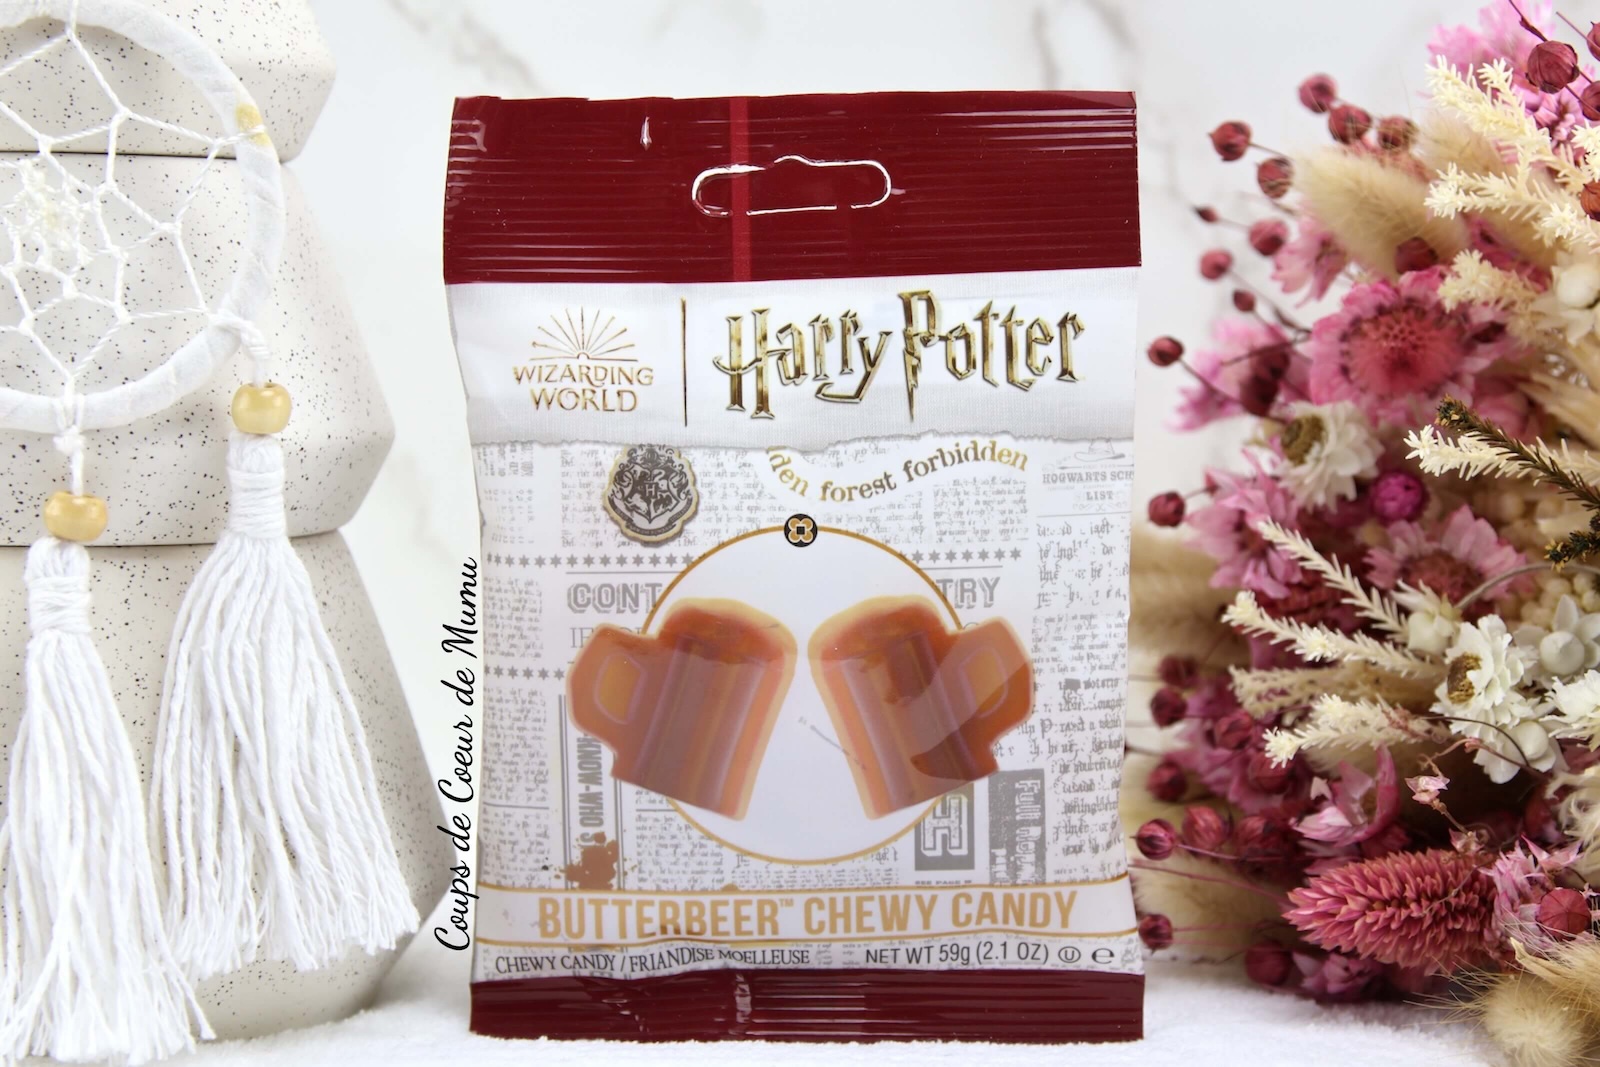 Harry Potter Butterbeer Chewy Candy Bag Jelly Belly